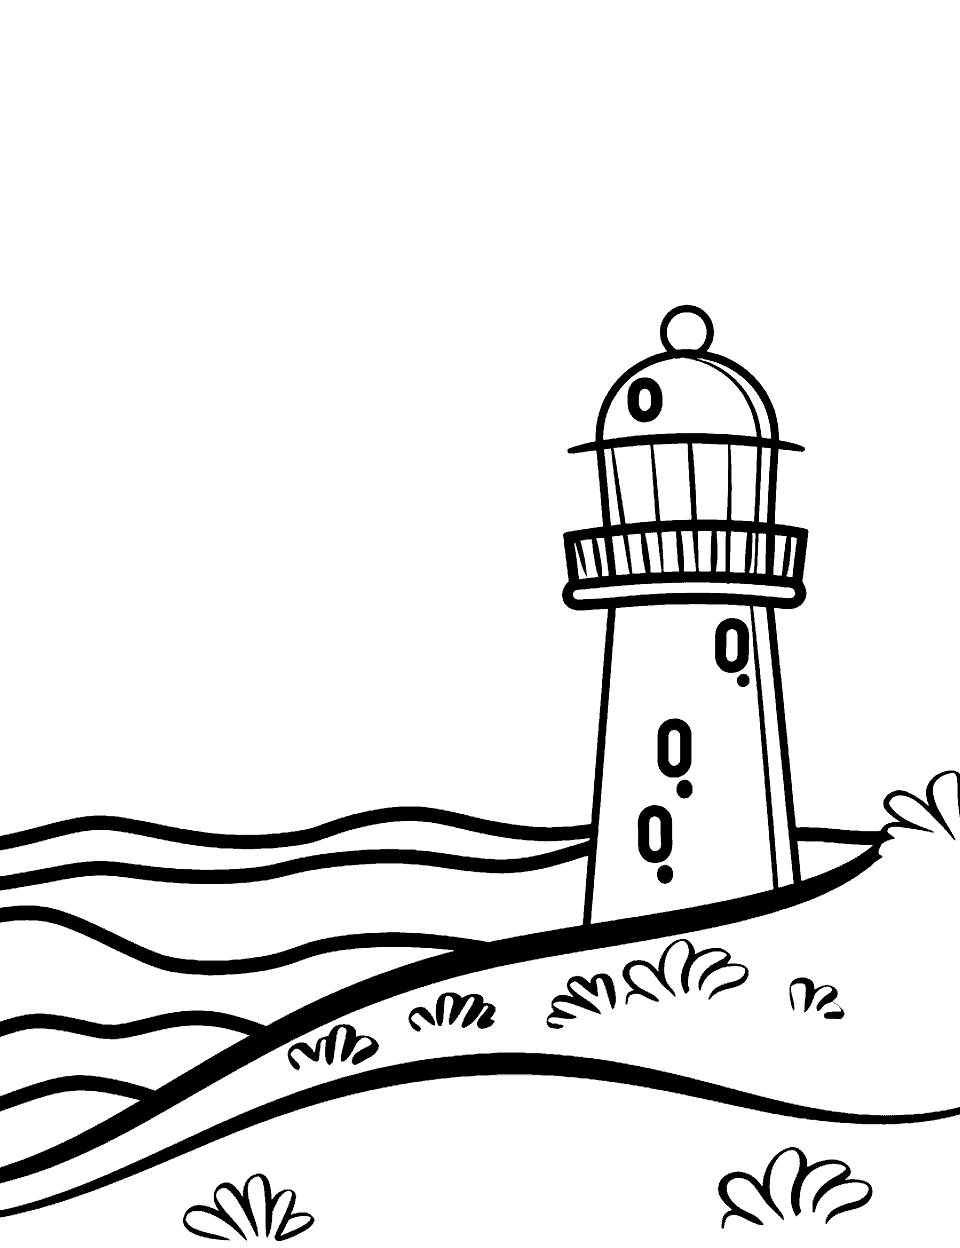 Lighthouse View Coloring Page - A lone lighthouse standing tall.